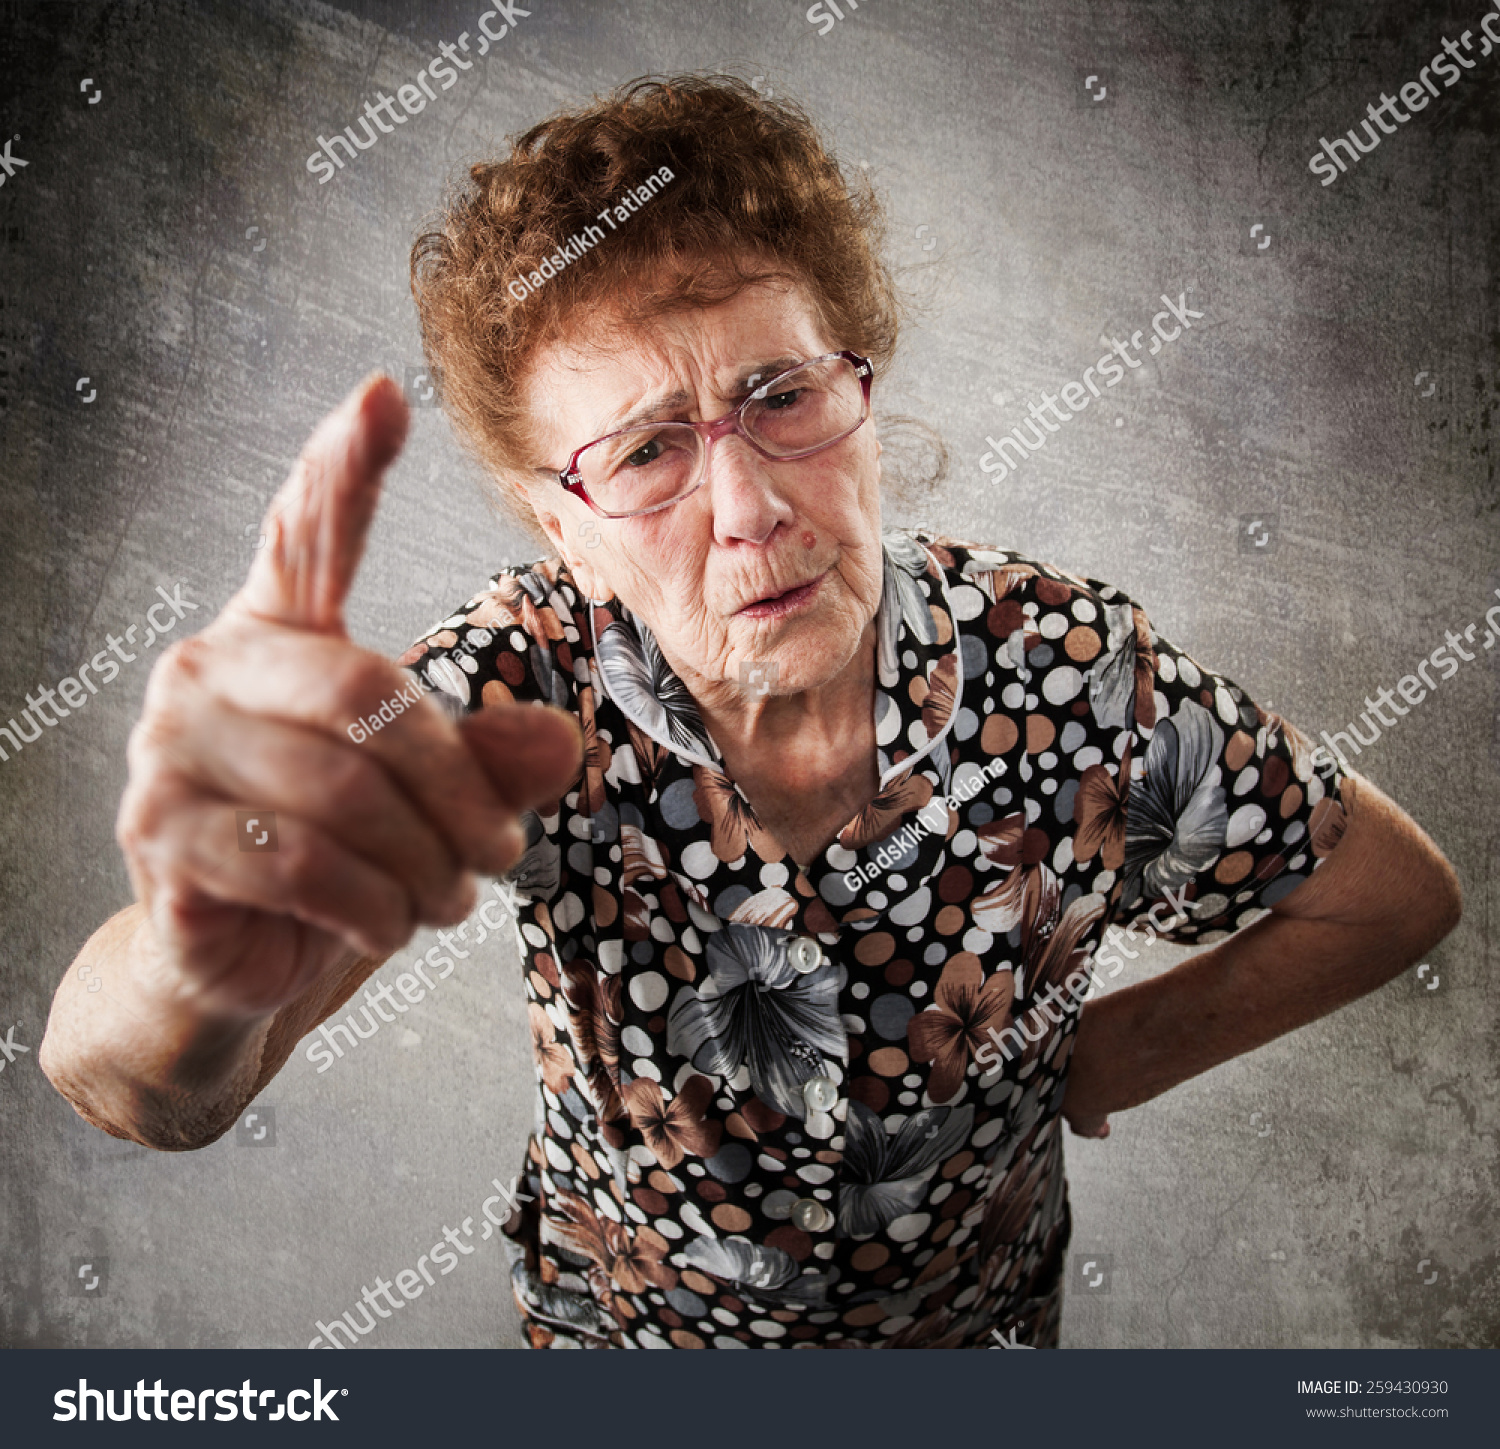 Scolded the old woman. Senior gives instruction. Anger grandmother #259430930